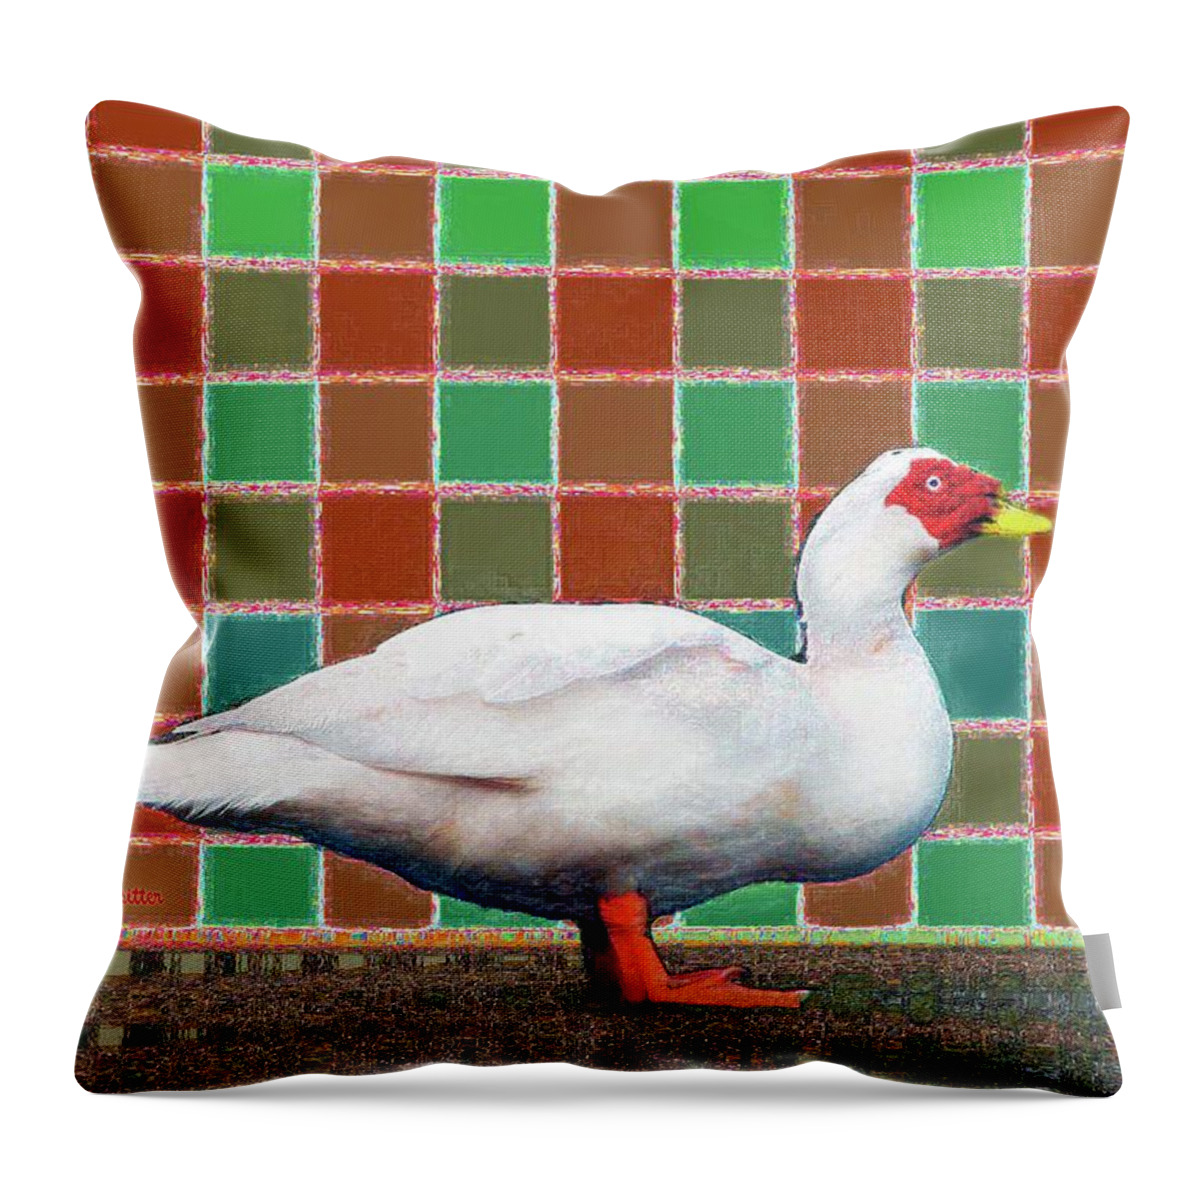 Posters Throw Pillow featuring the digital art Pato Art 4 by Miss Pet Sitter